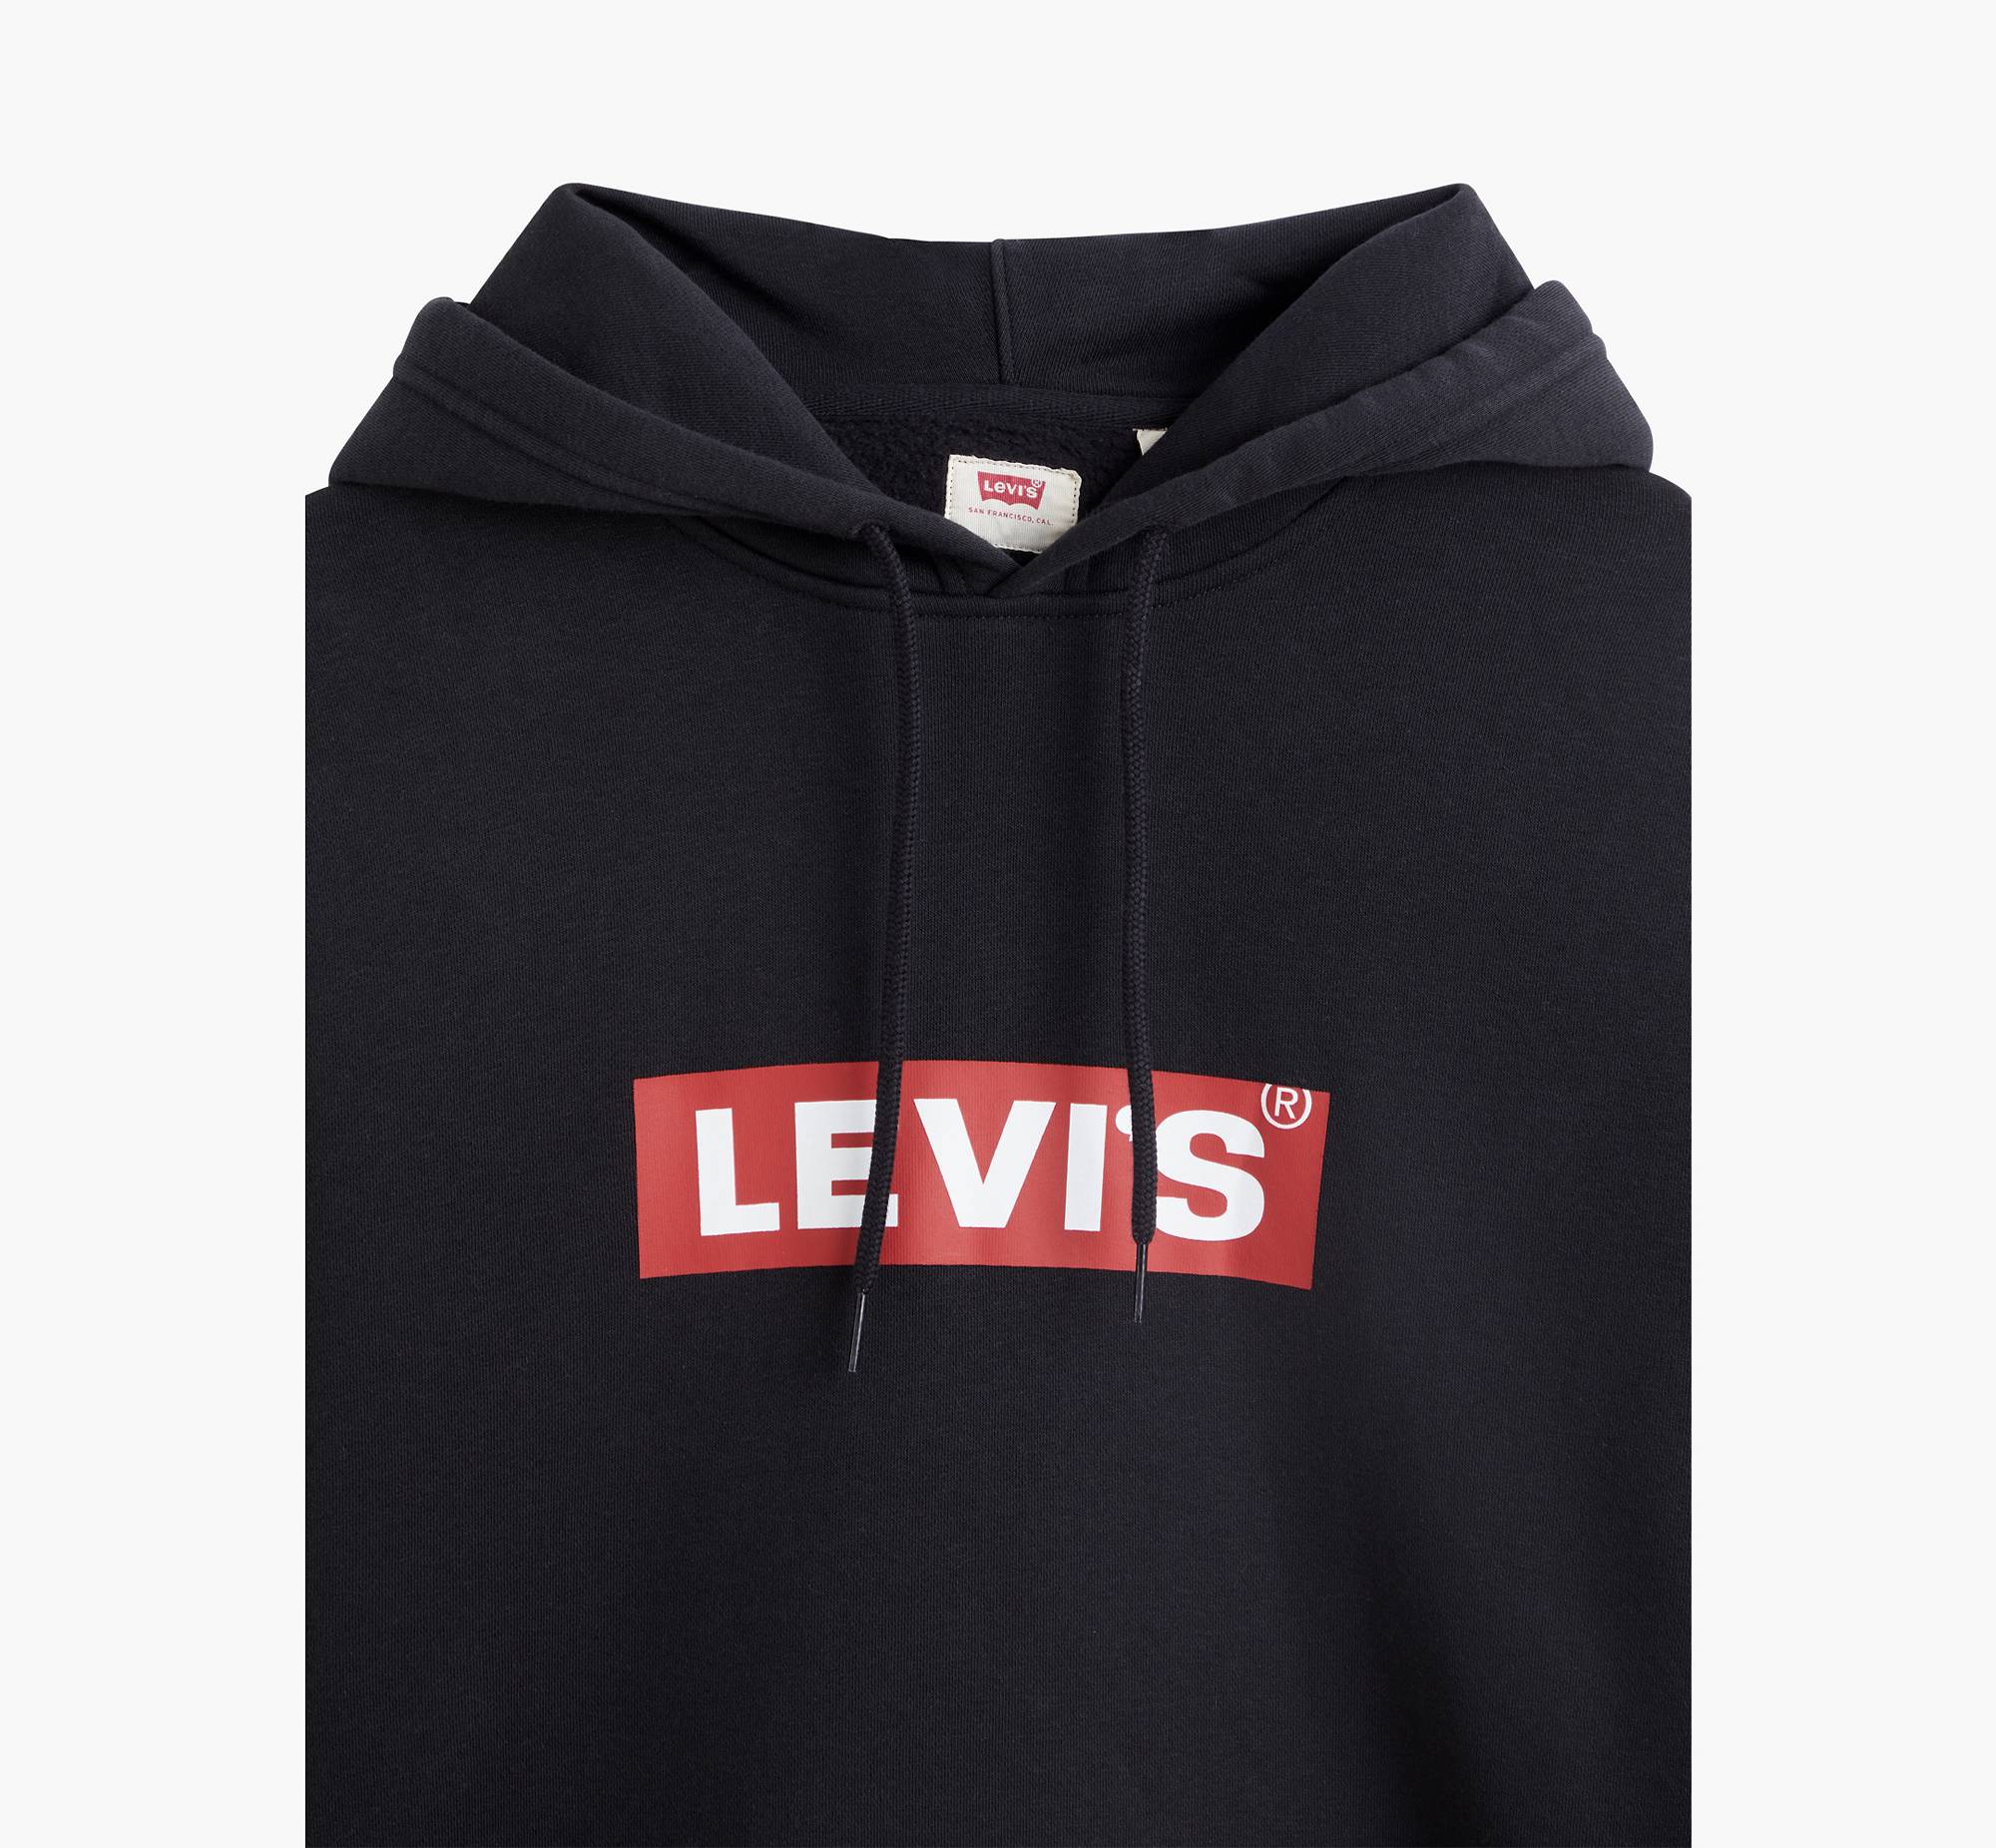 Relaxed Graphic Hoodie 6